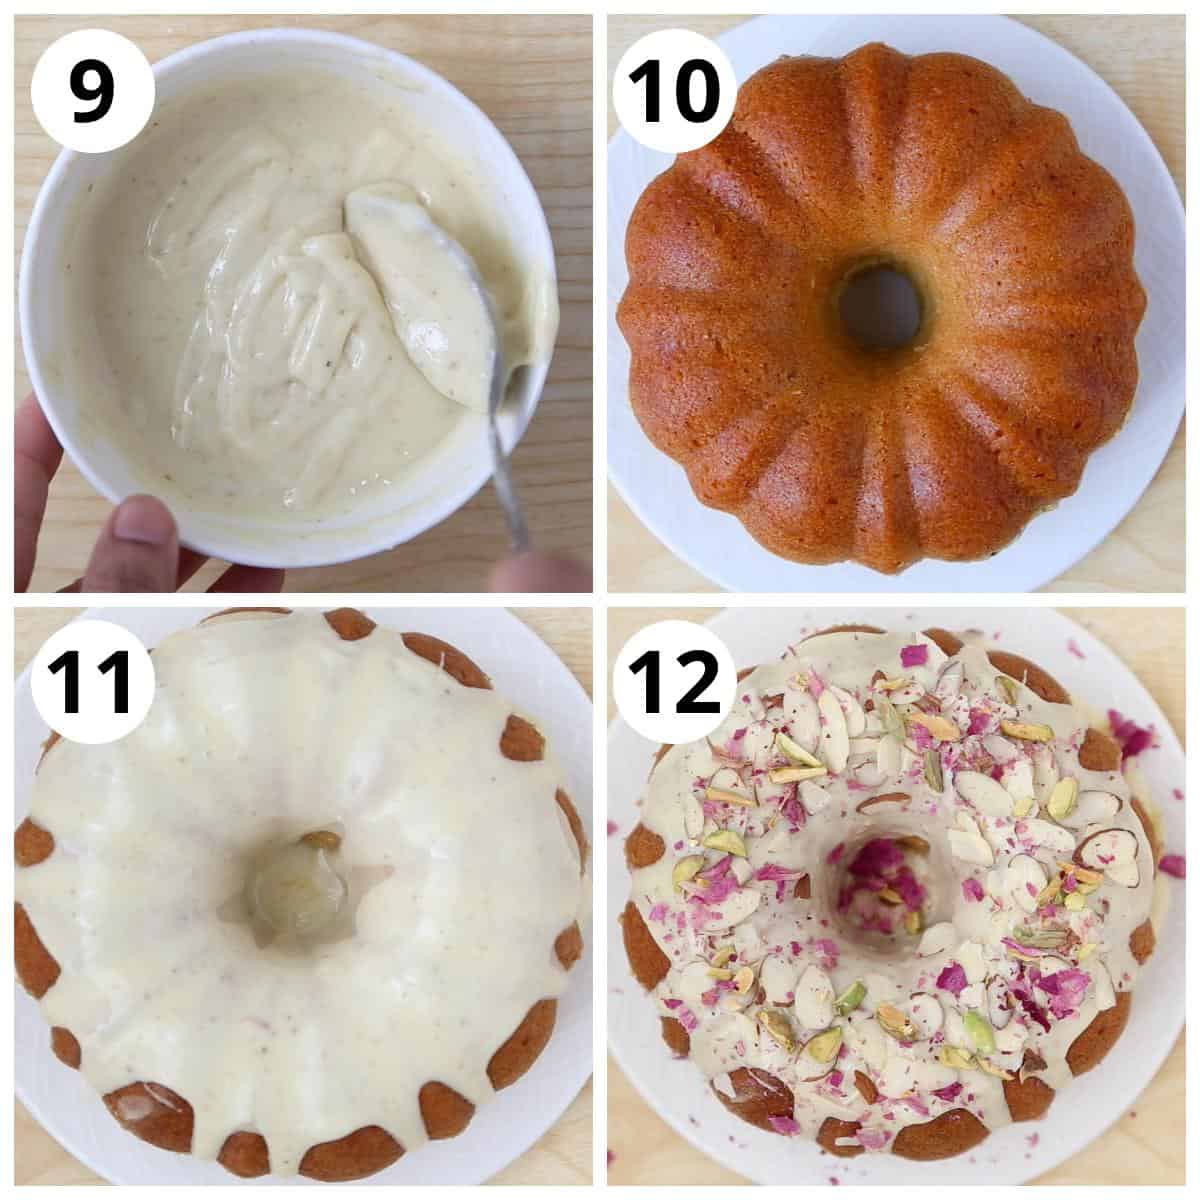 Steps for decorating thandai cake with glaze